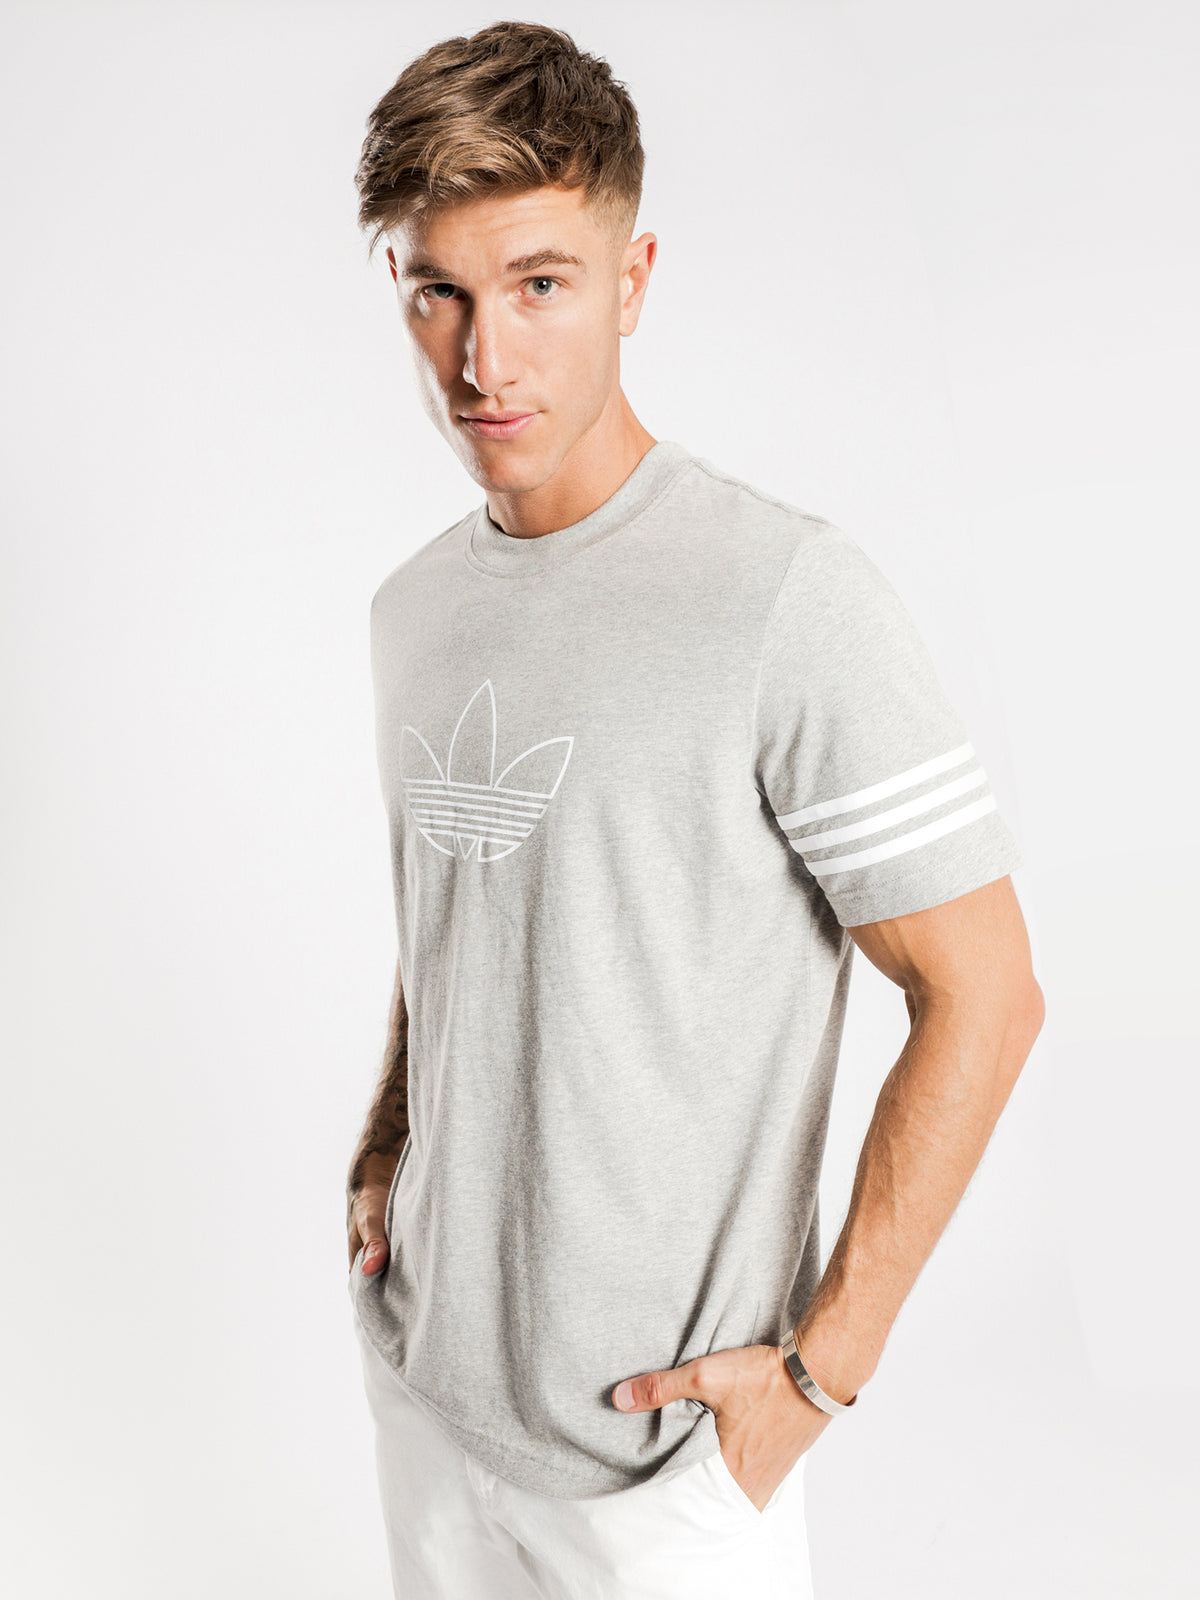 Outline T-Shirt in Grey